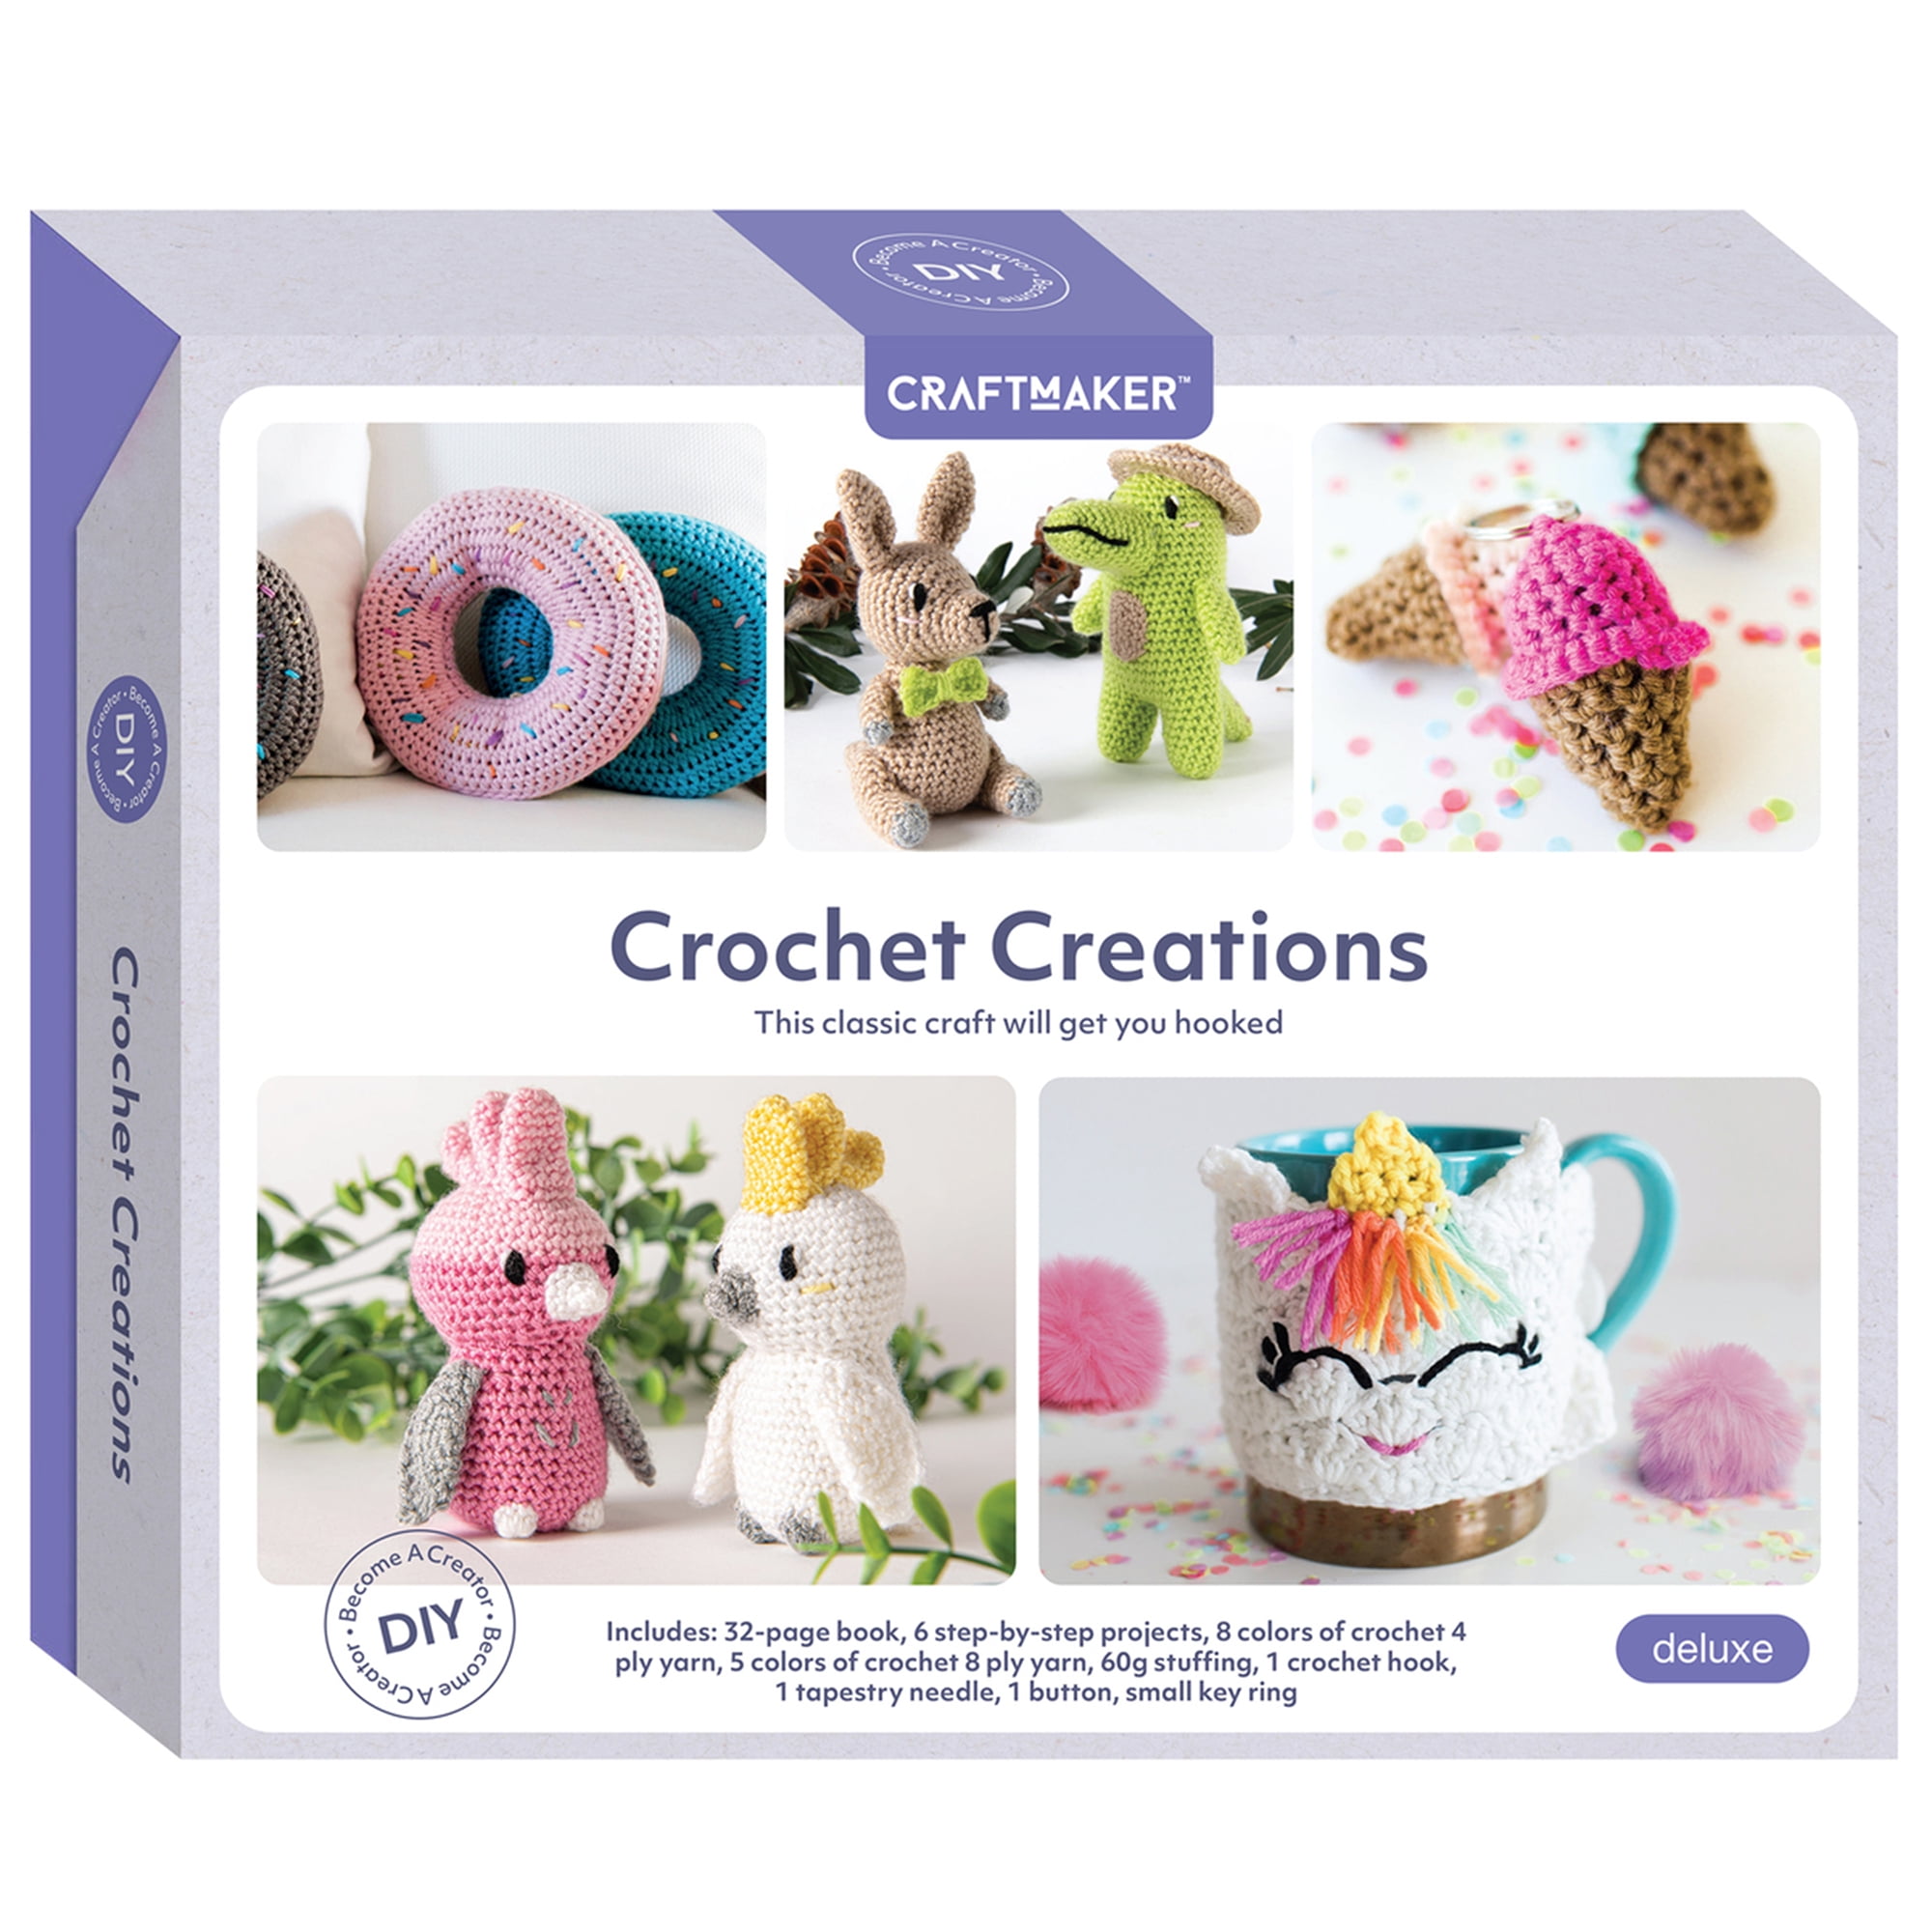 learn to crochet kit for beginners — Cookston Crafts